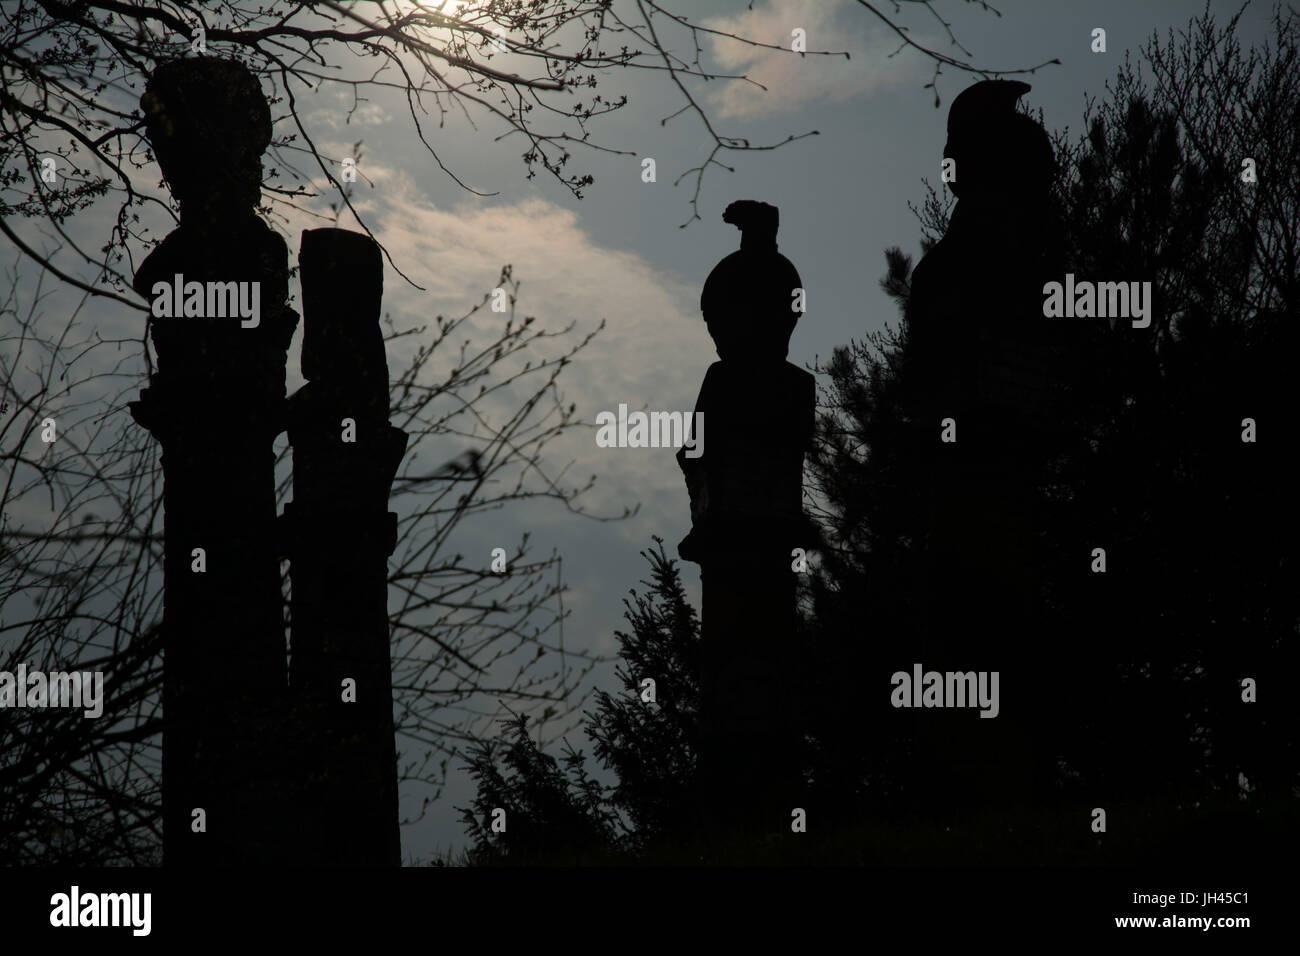 Twilight of the Gods! Silhouettes of the statues in the park against the dimming sky. Stock Photo